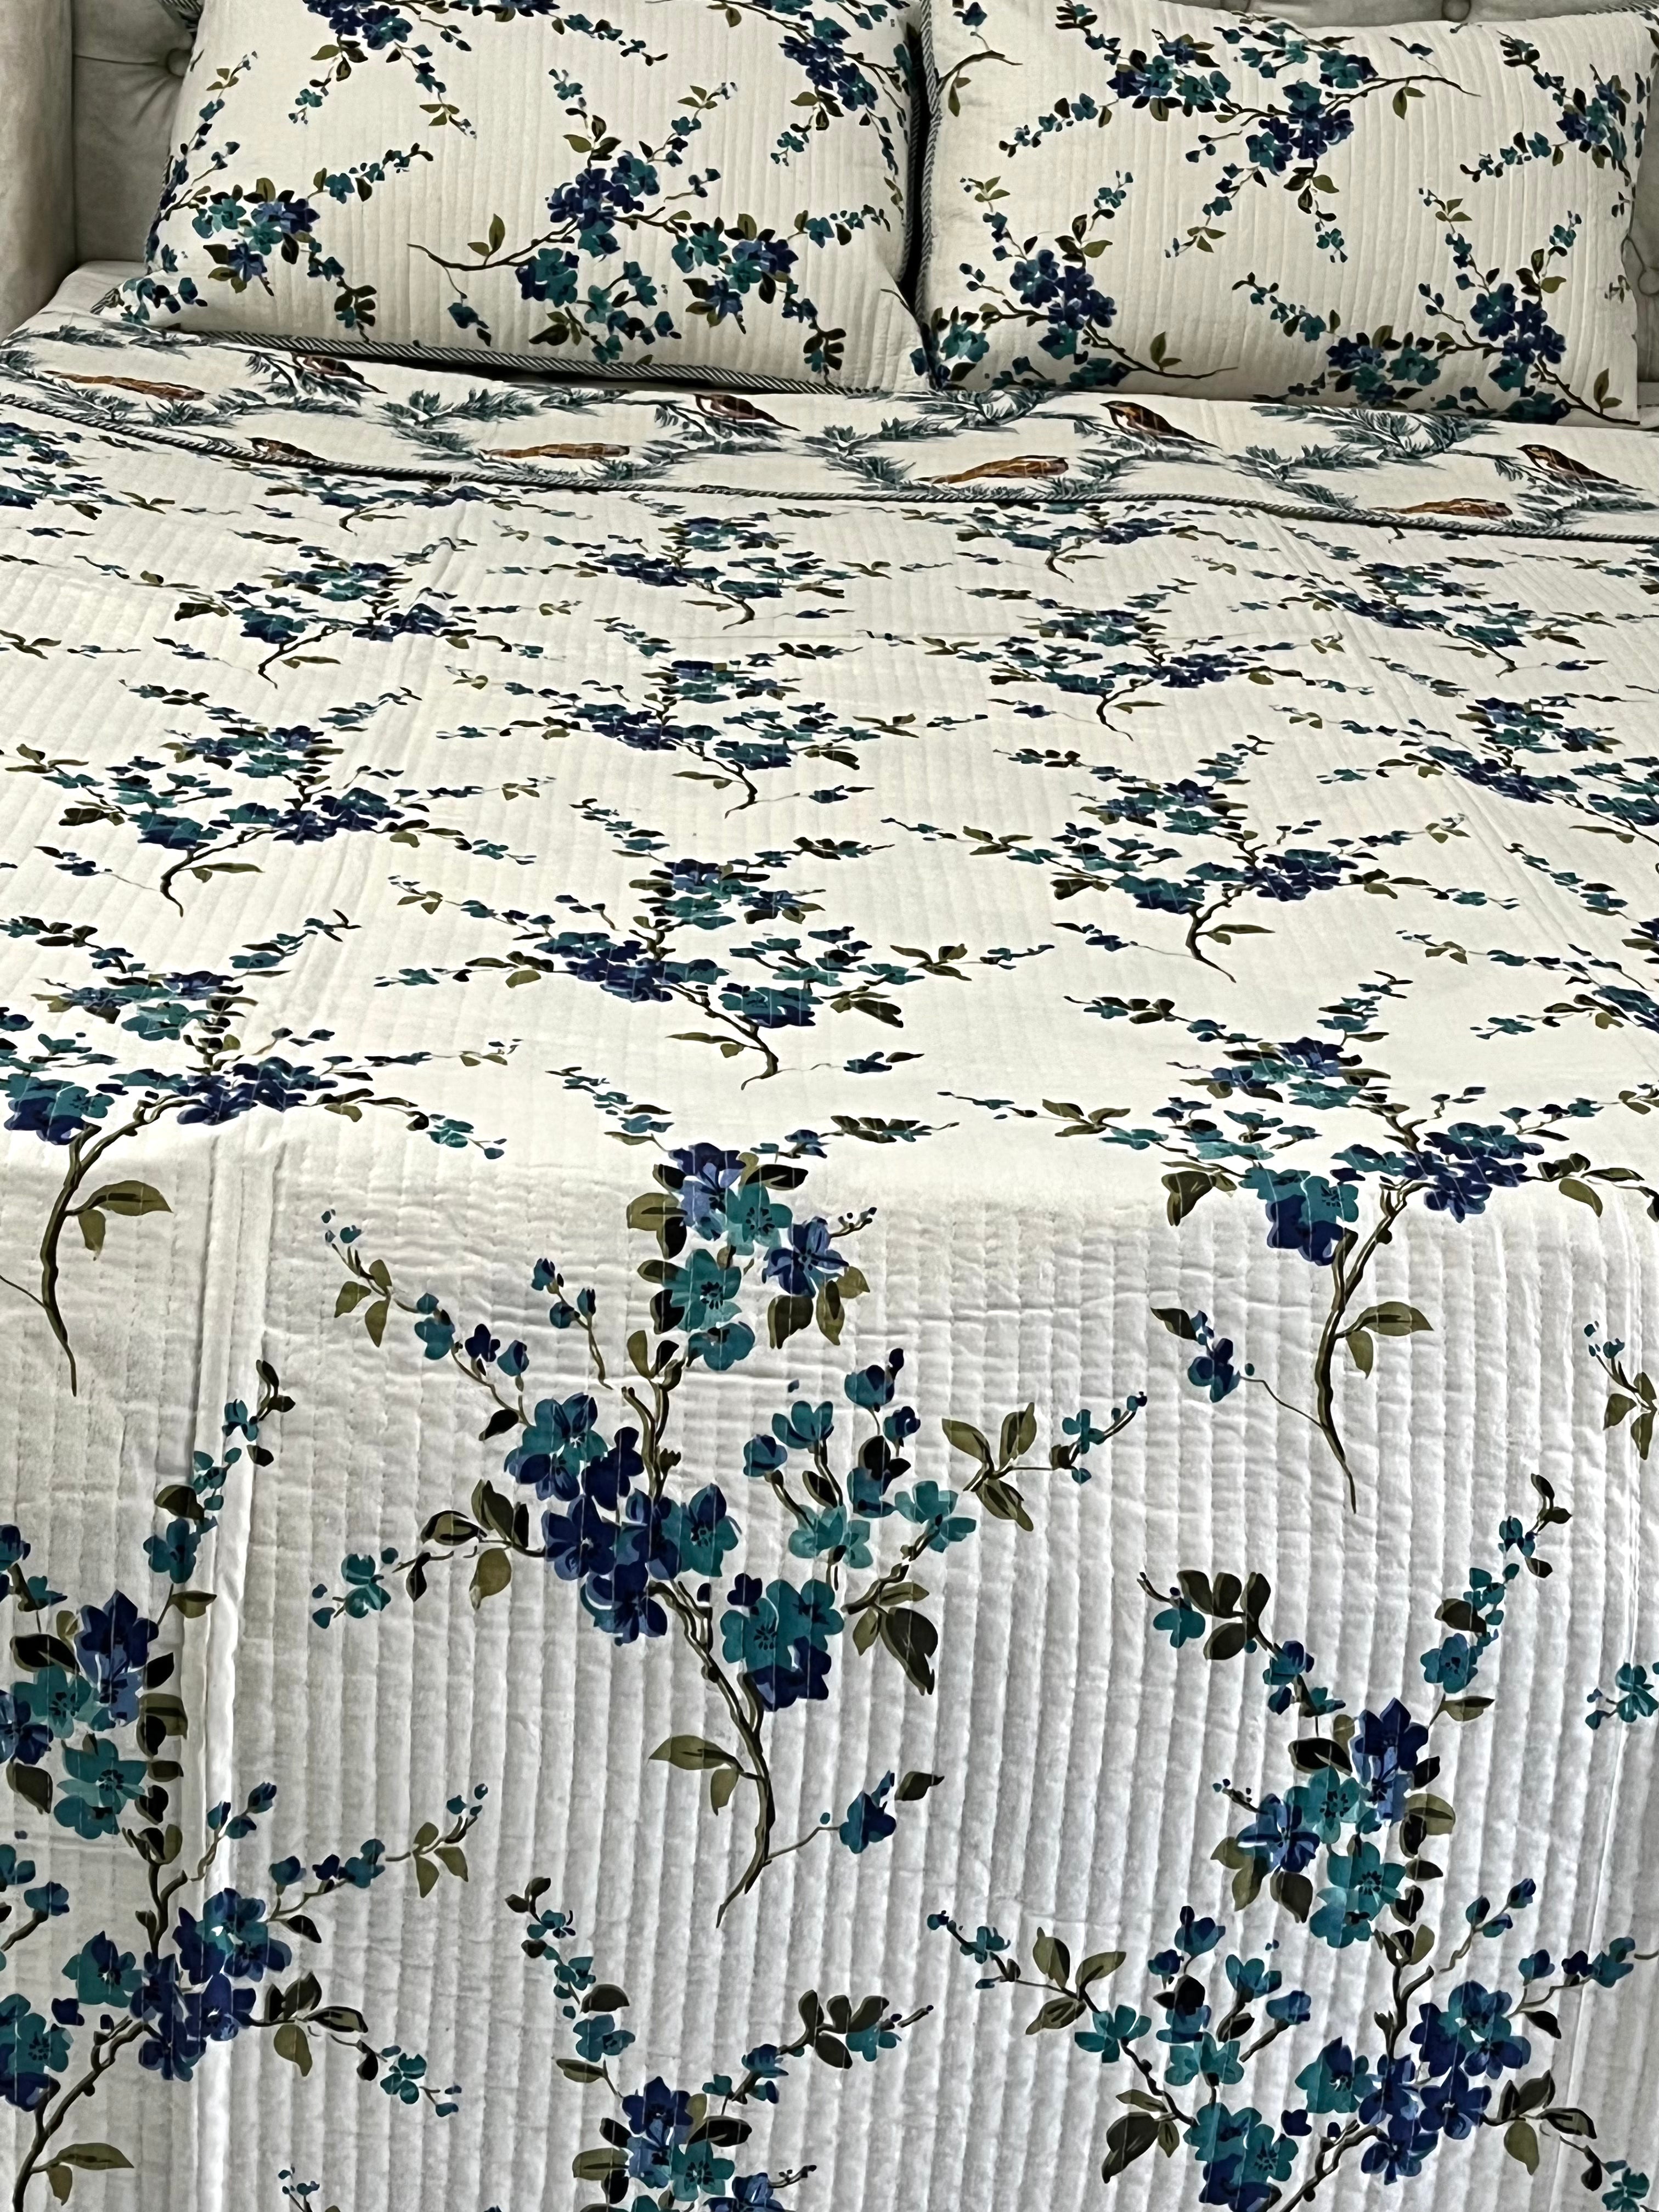 White & Blue Garden Print Pure Cotton King Size Quilted Bedspread 90x104 inches